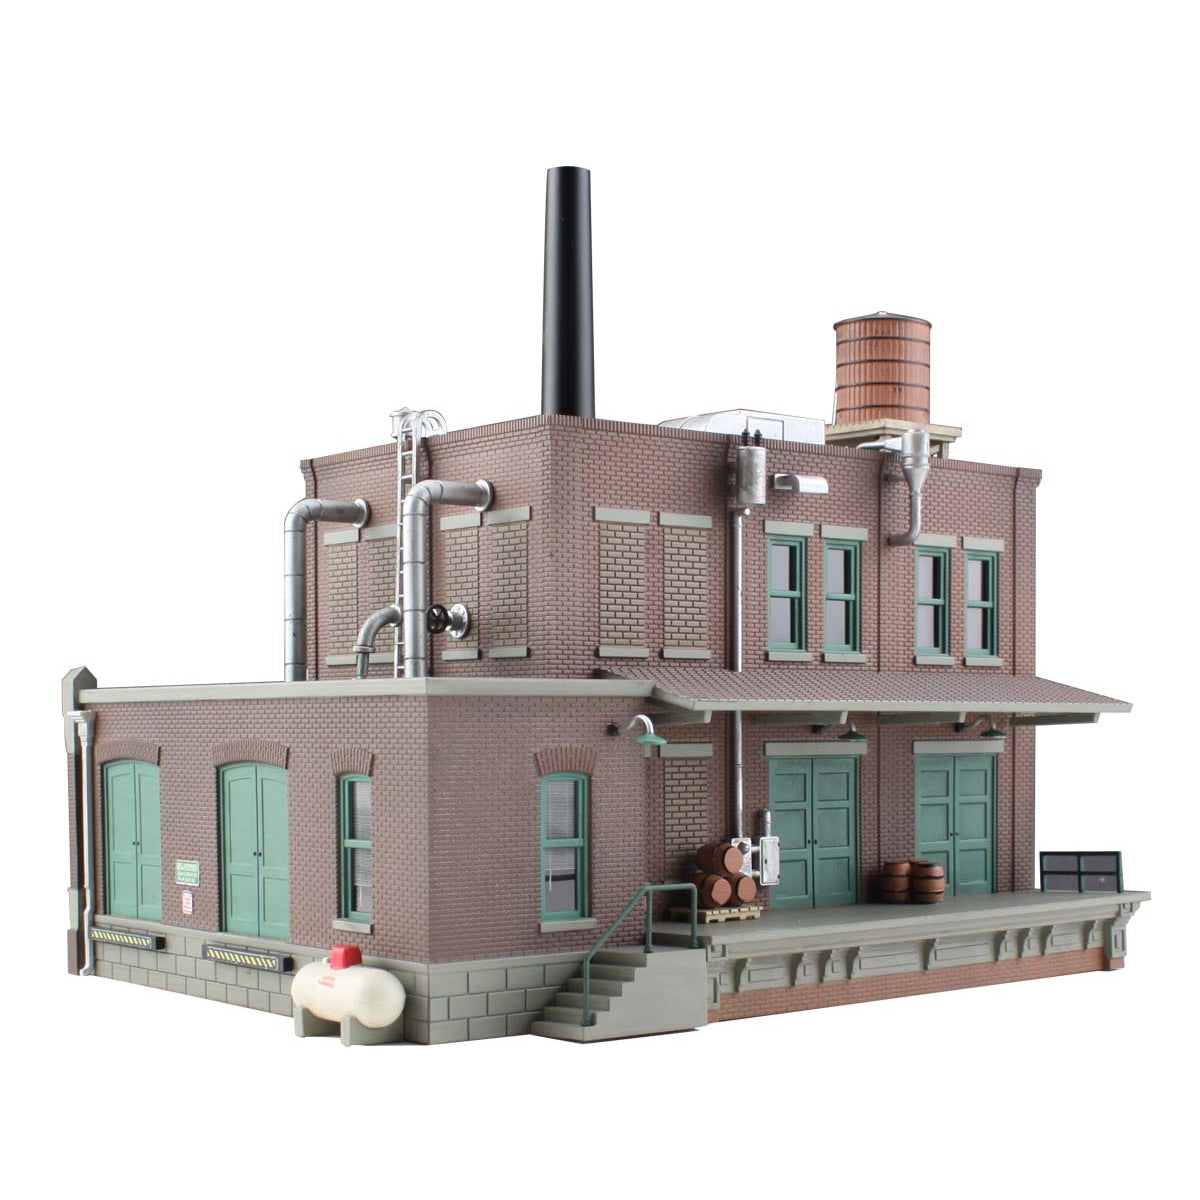 Woodland Scenics 4924 Clyde & Dale's Barrel Factory - N Scale